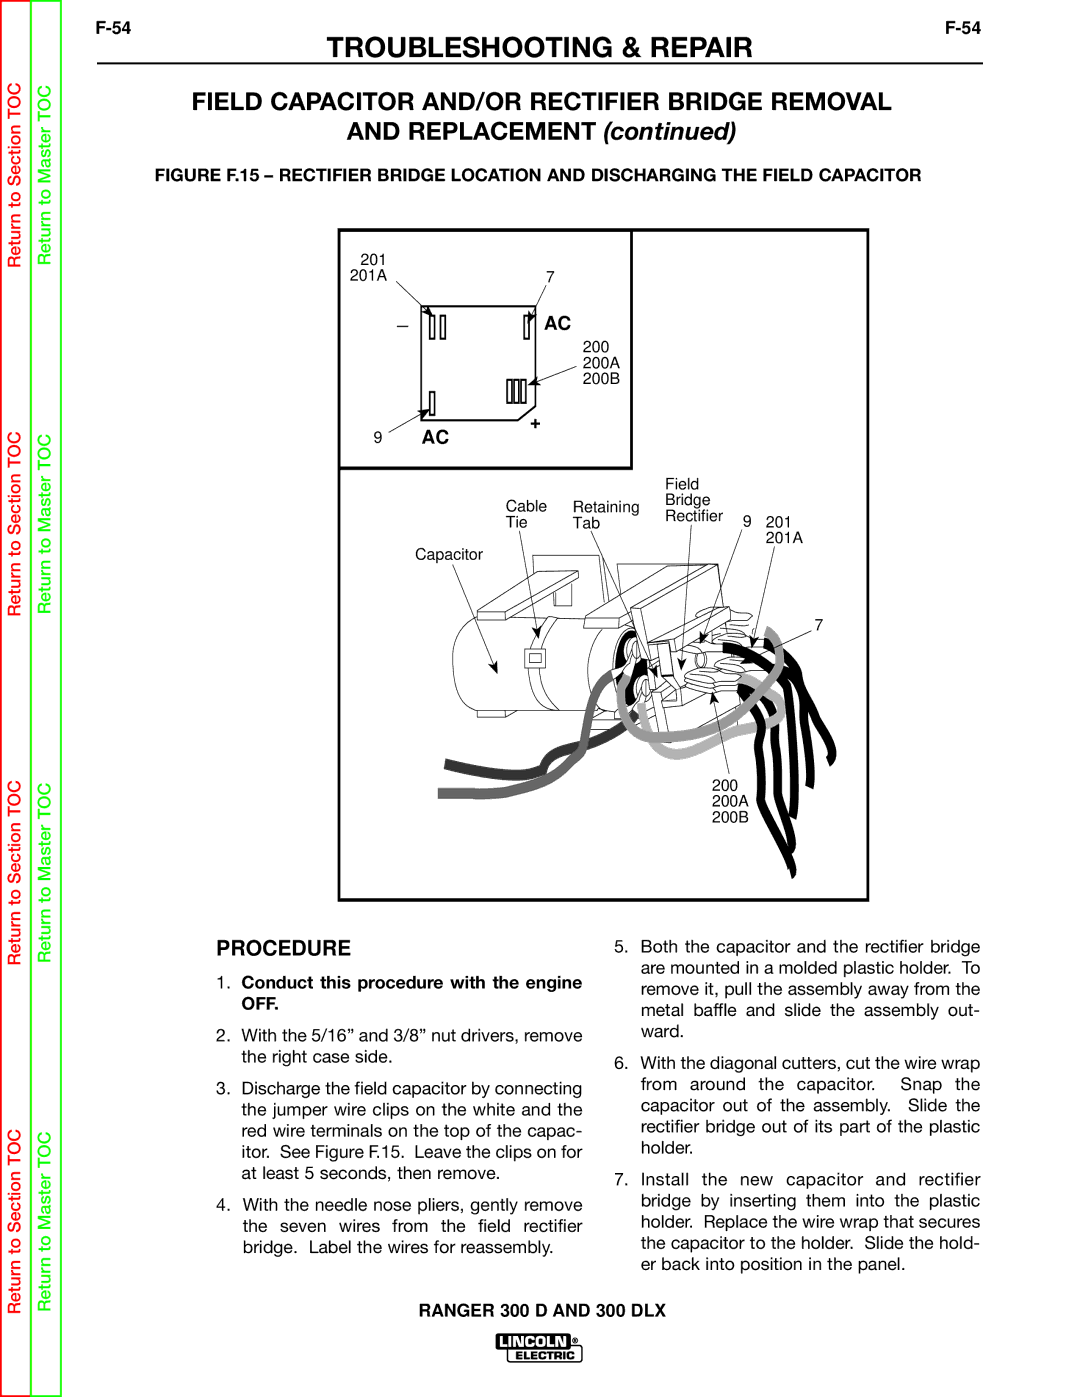 Lincoln Electric SVM148-B service manual Field Capacitor AND/OR Rectifier Bridge Removal, Replacement 